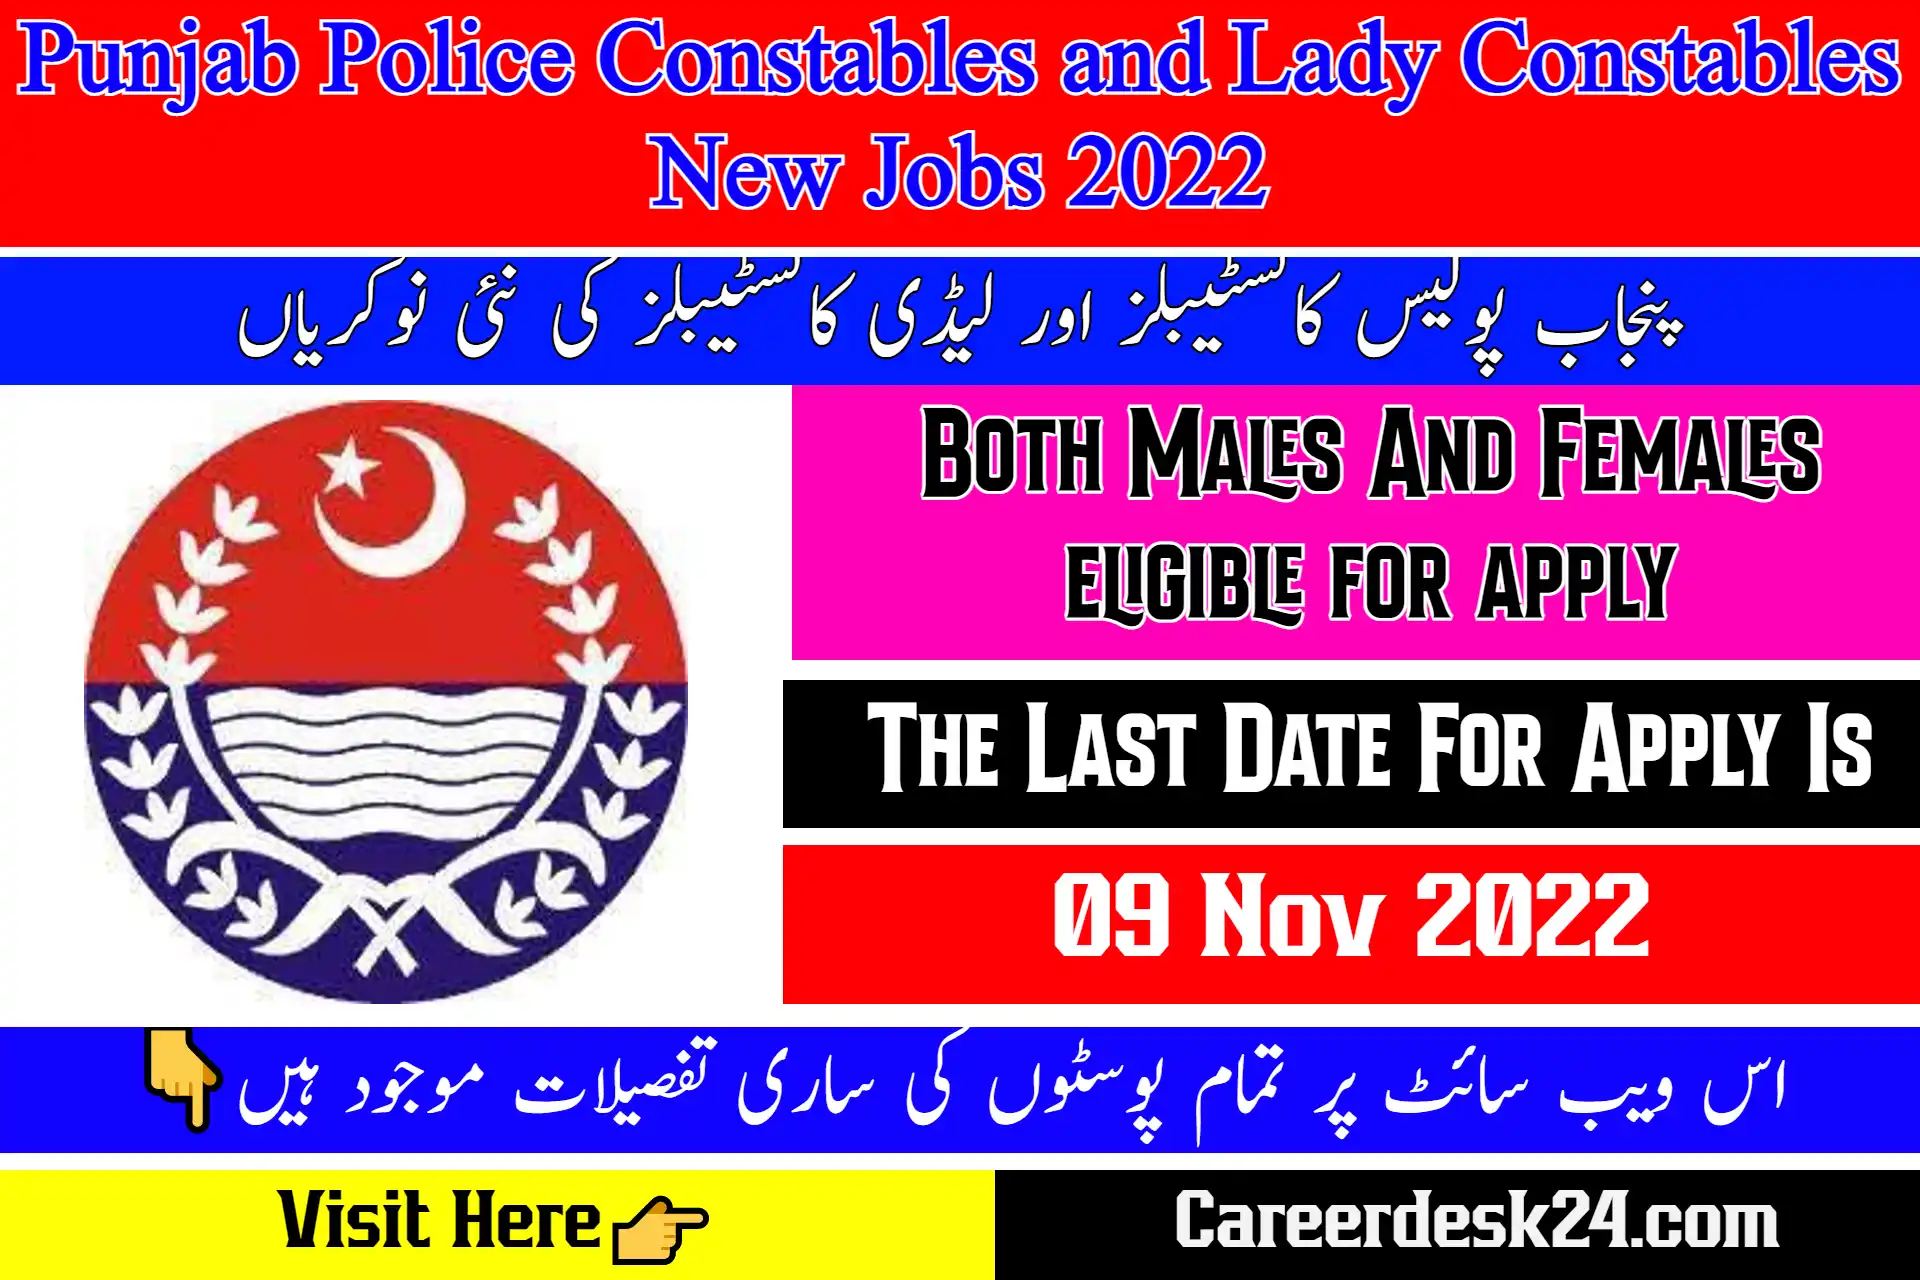 Punjab Police Constables and Lady Constables New Jobs 2022